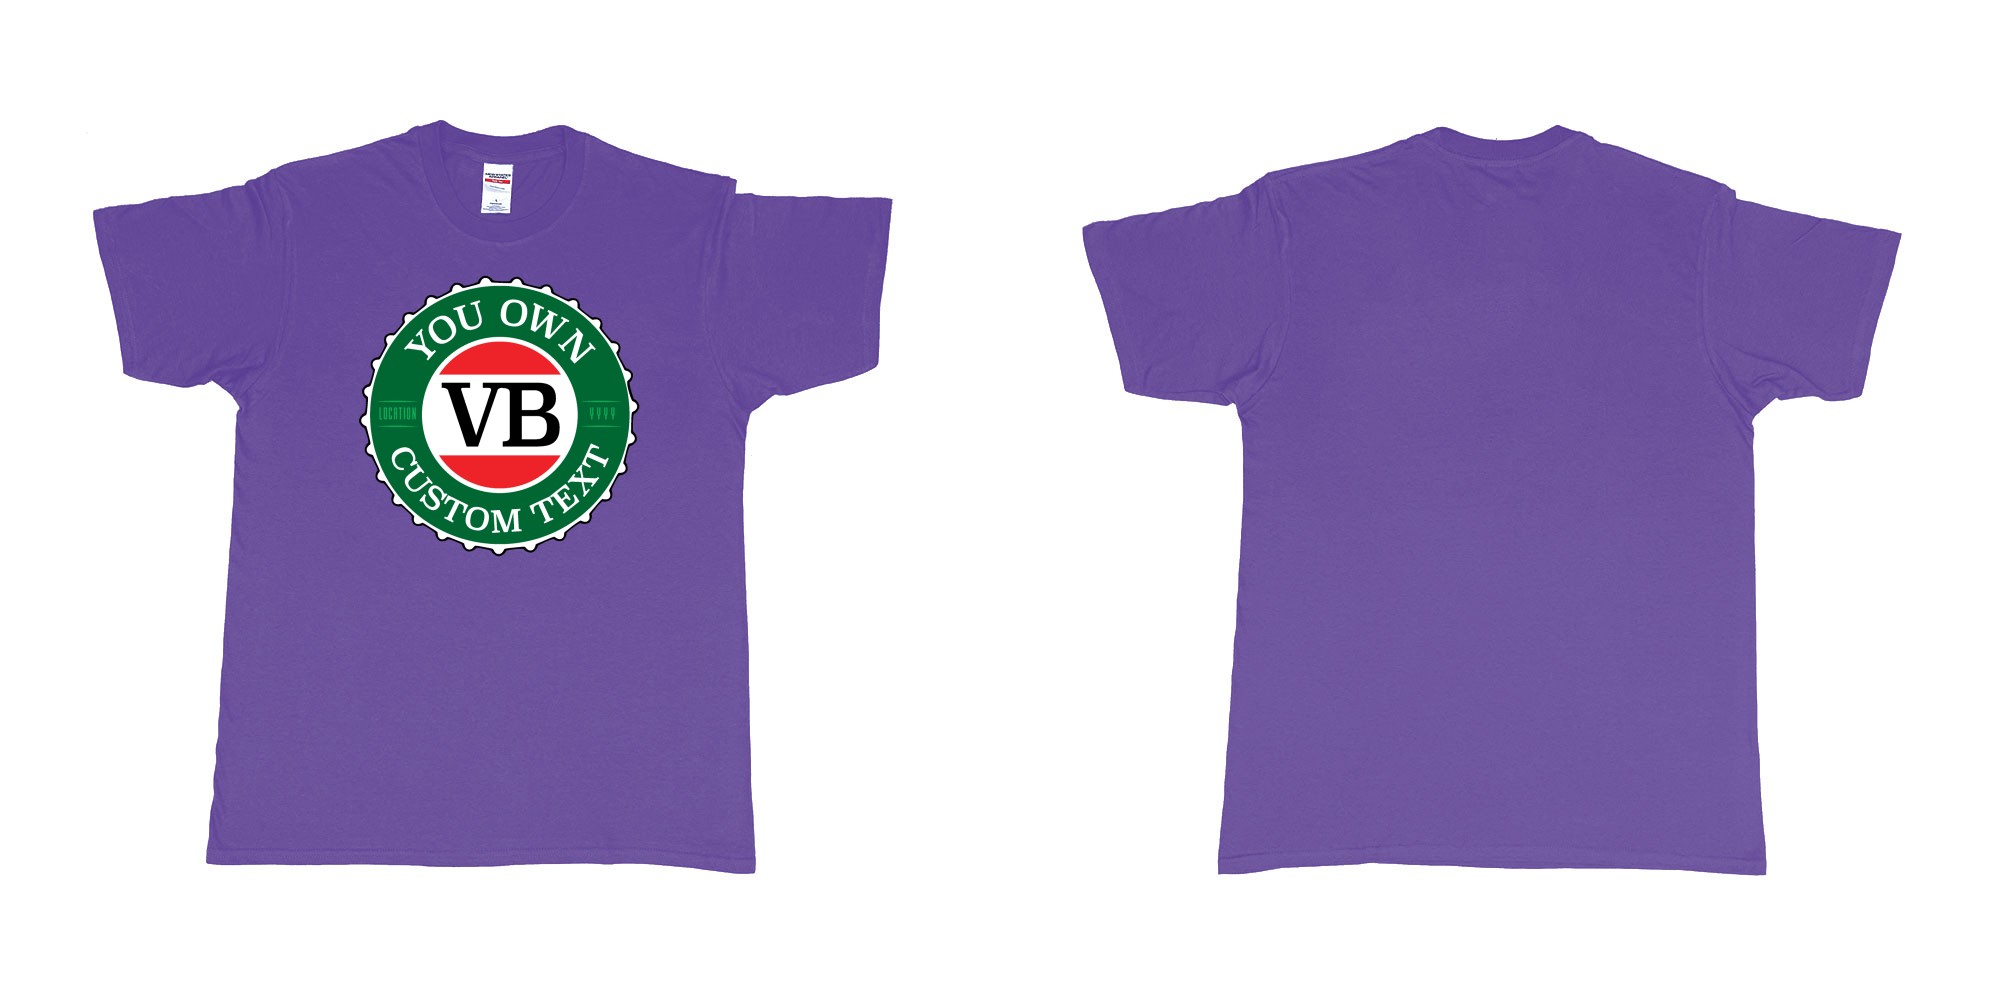 Custom tshirt design vb victoria bitter beer brand bottlecap in fabric color purple choice your own text made in Bali by The Pirate Way